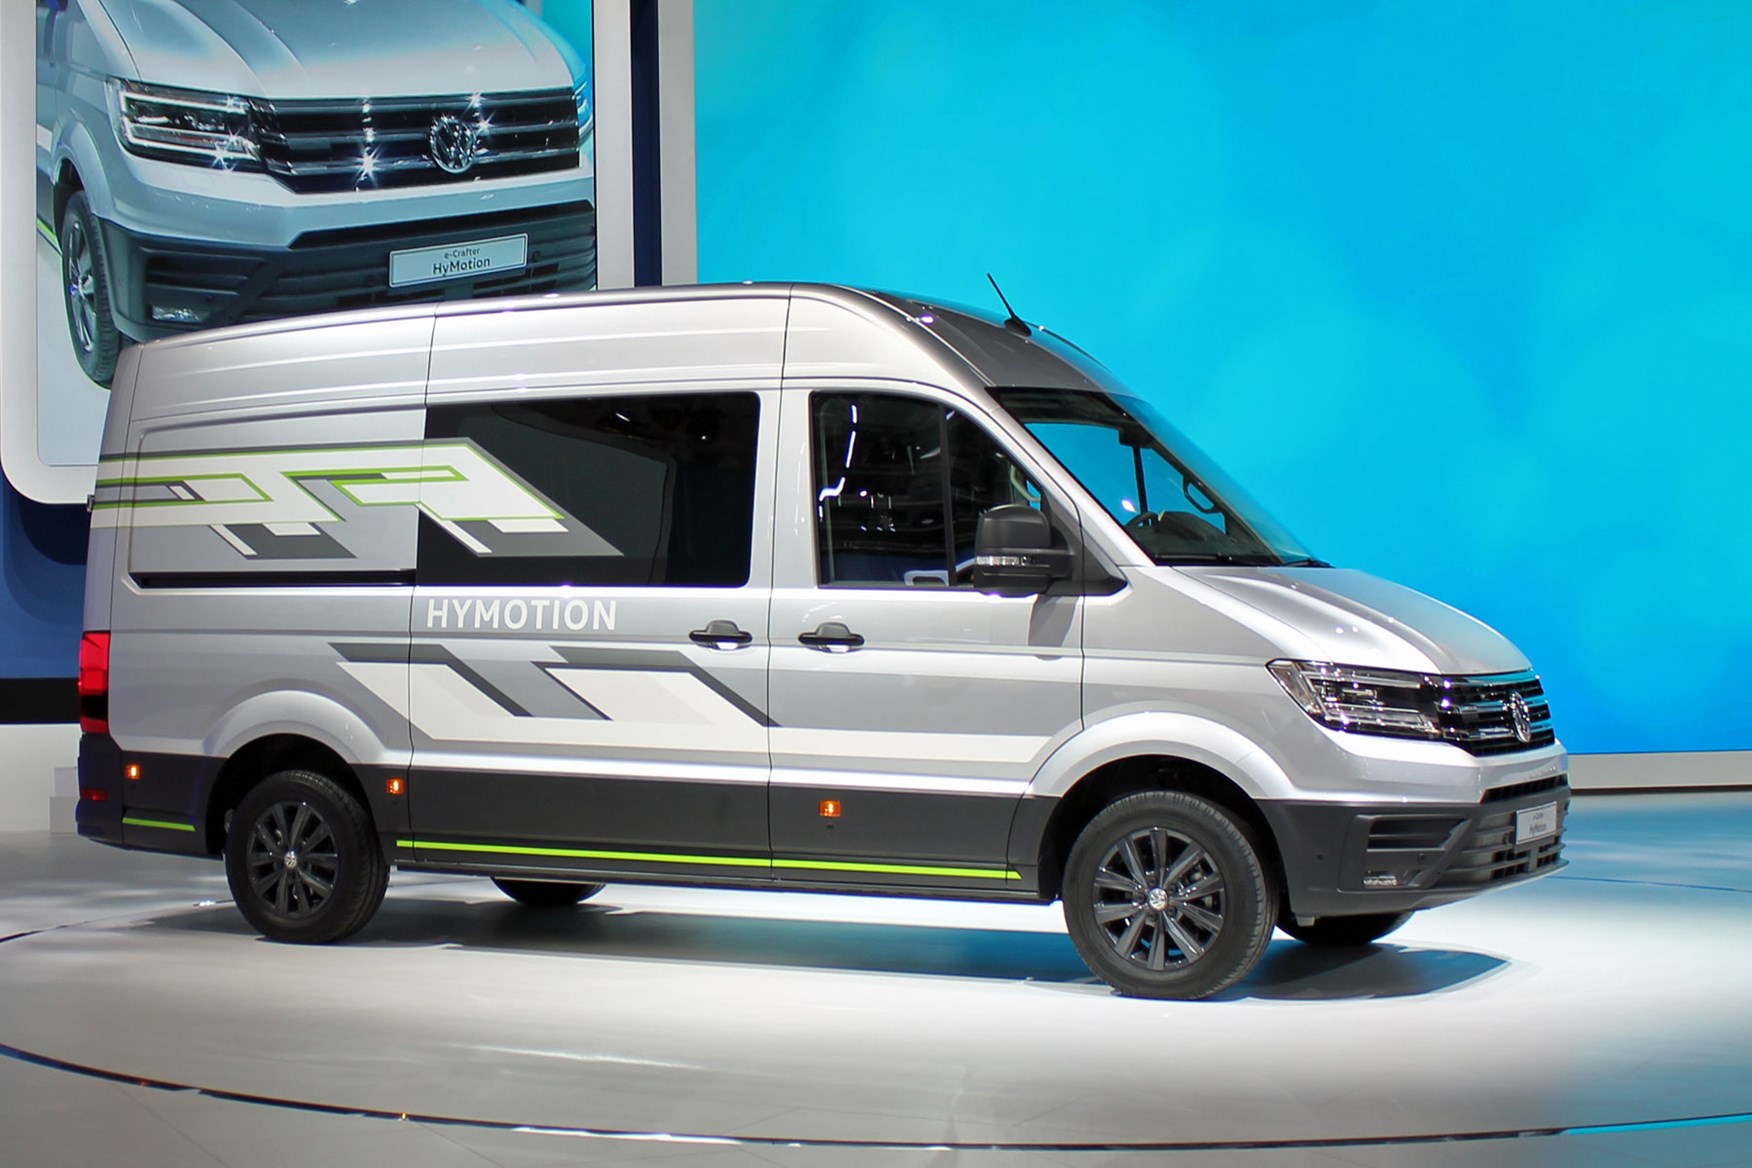 VW Crafter HyMotion concept previews future hydrogen fuel